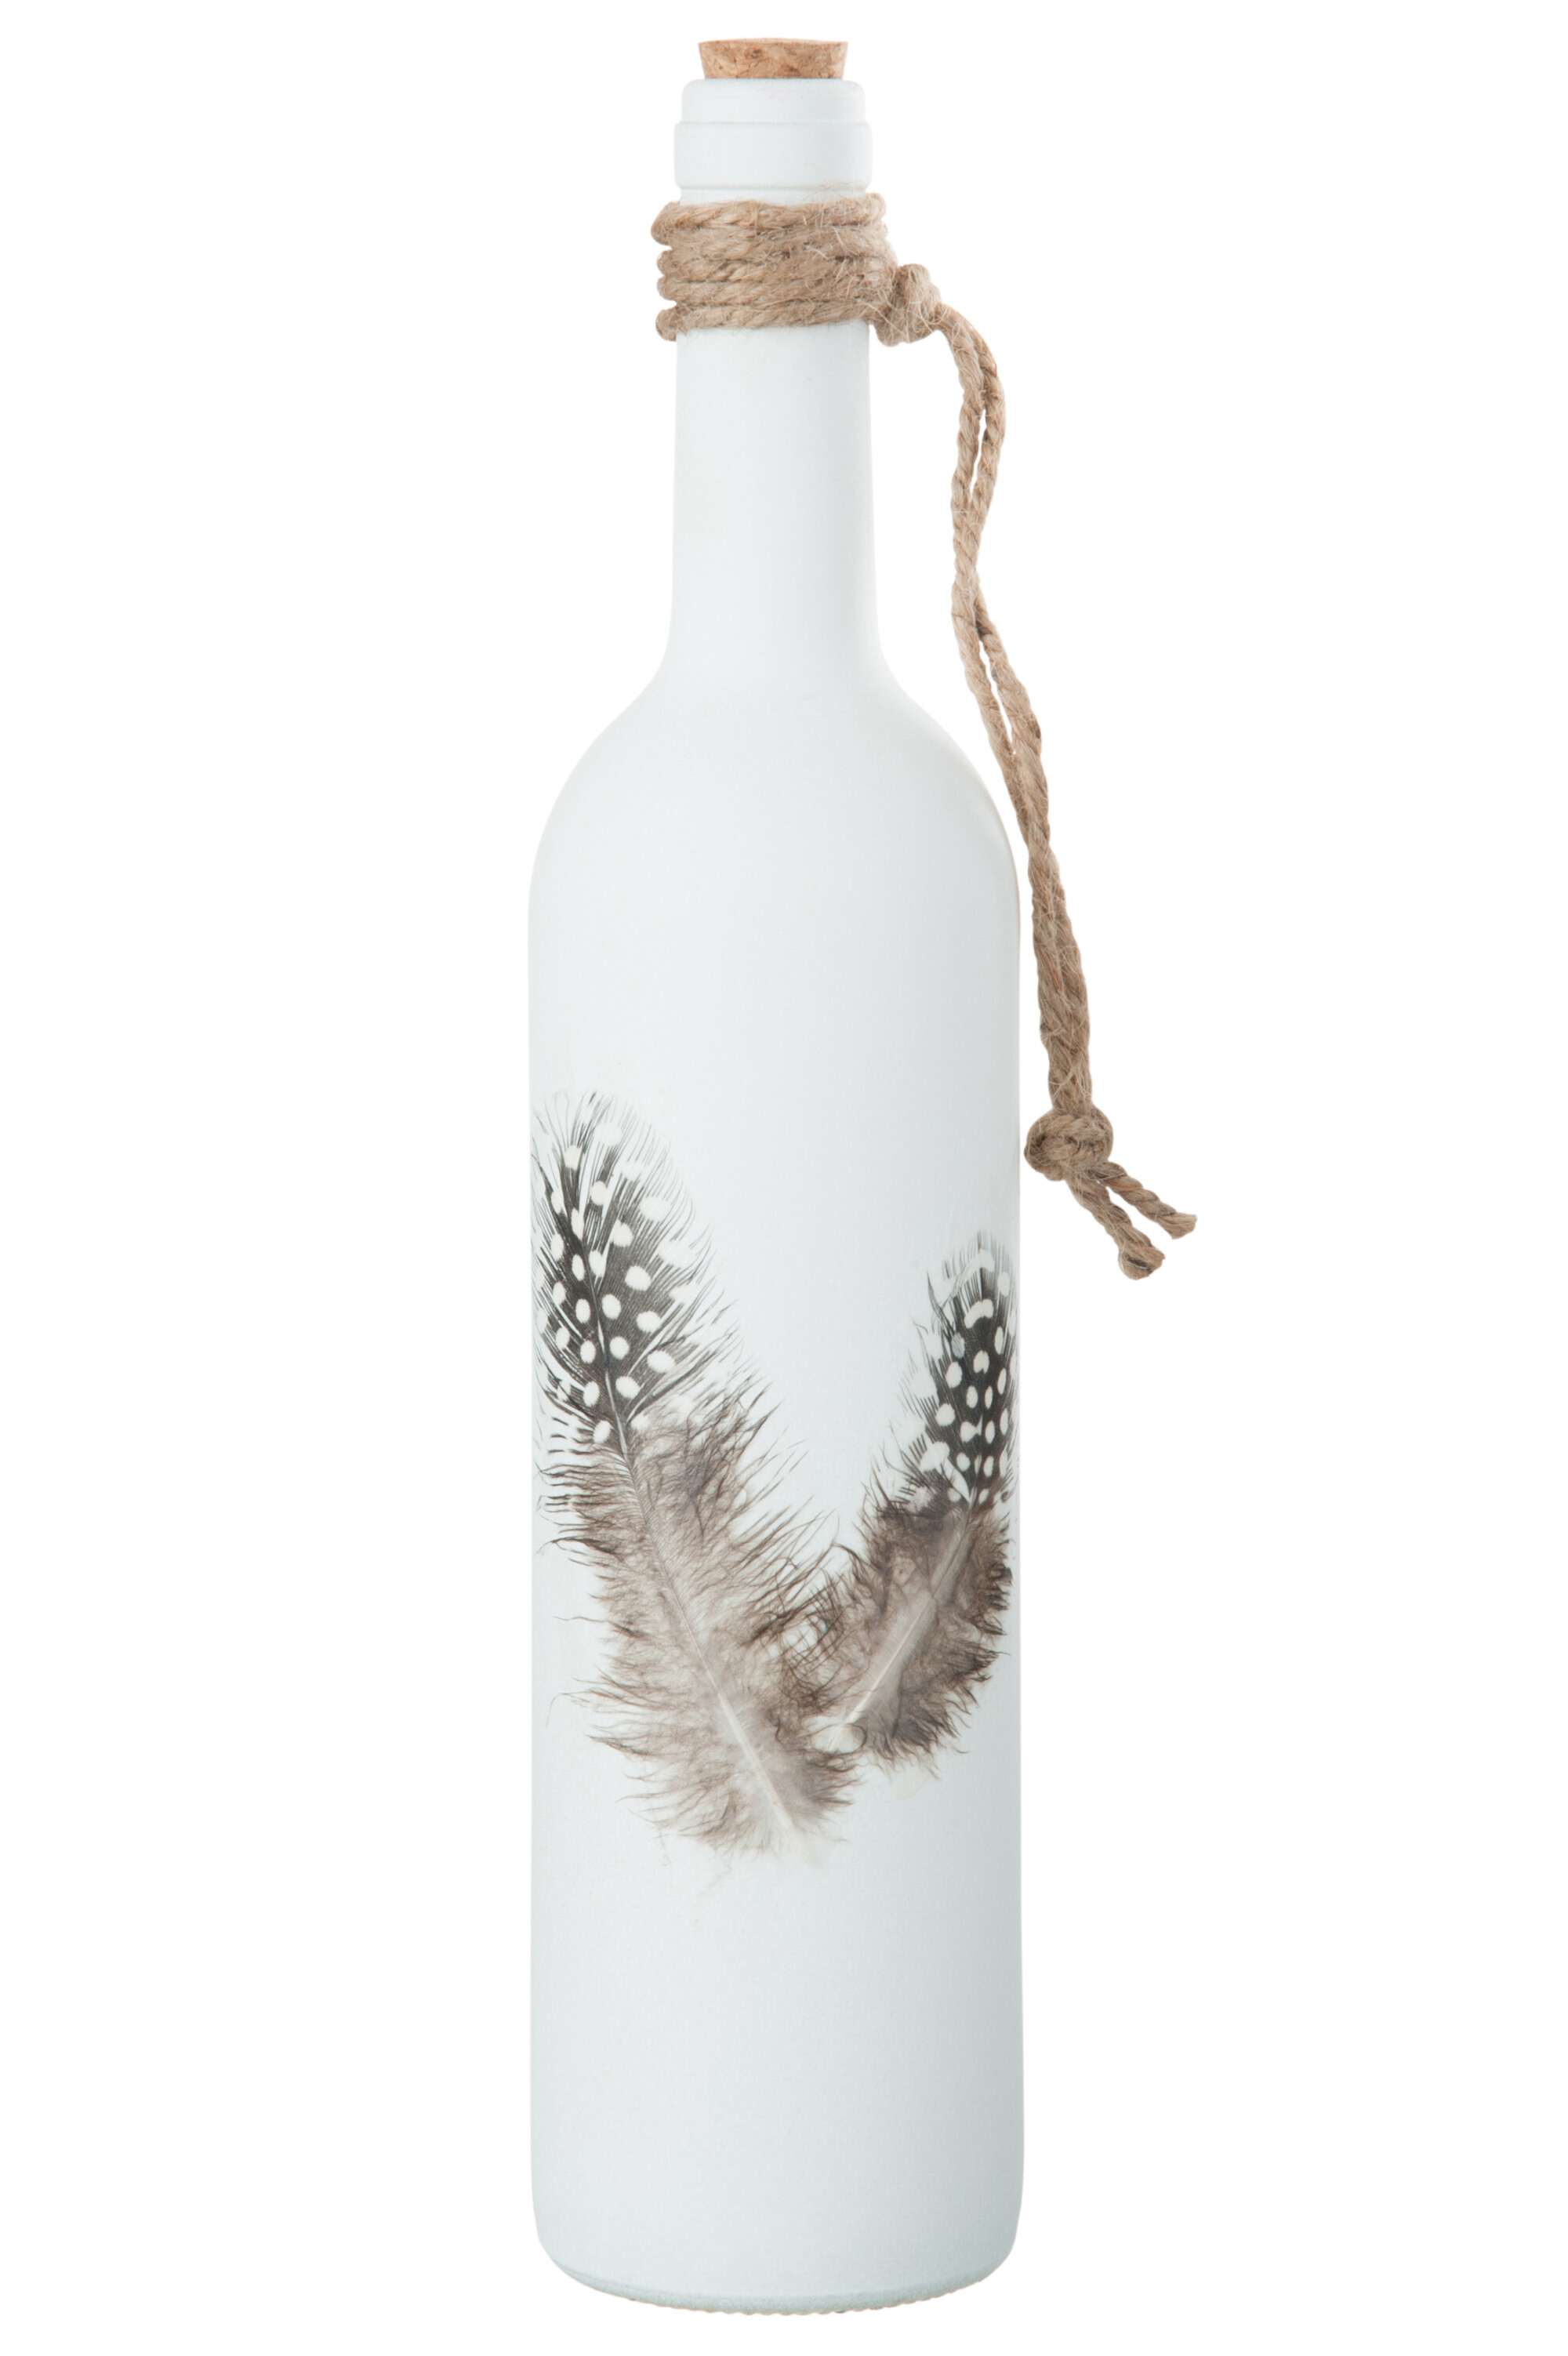 PHPH PLUMES VERRE BLANC